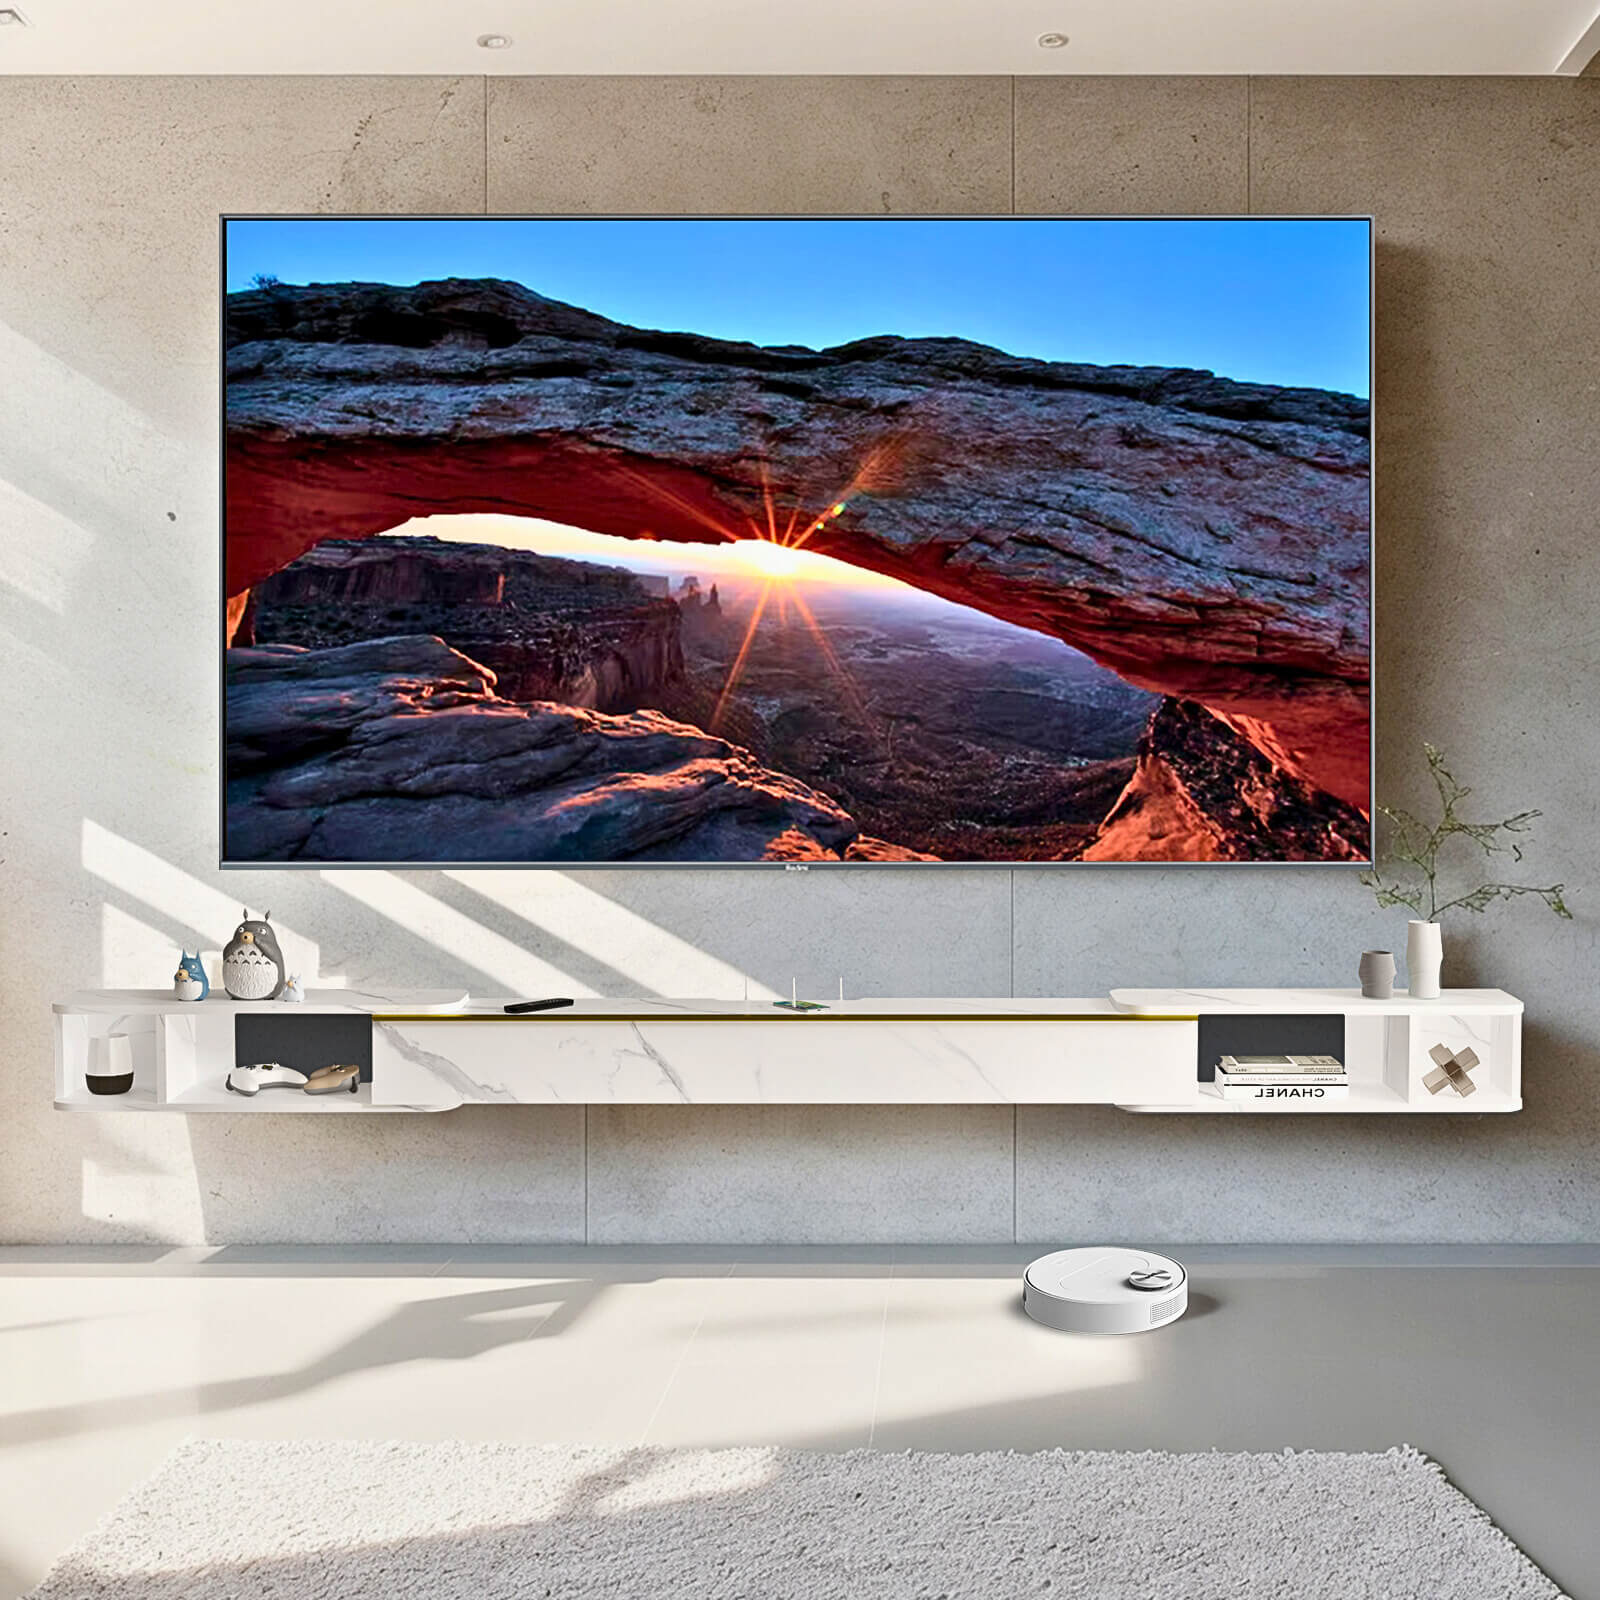 87"- 122" Retracto Floating TV Stand, Marble White